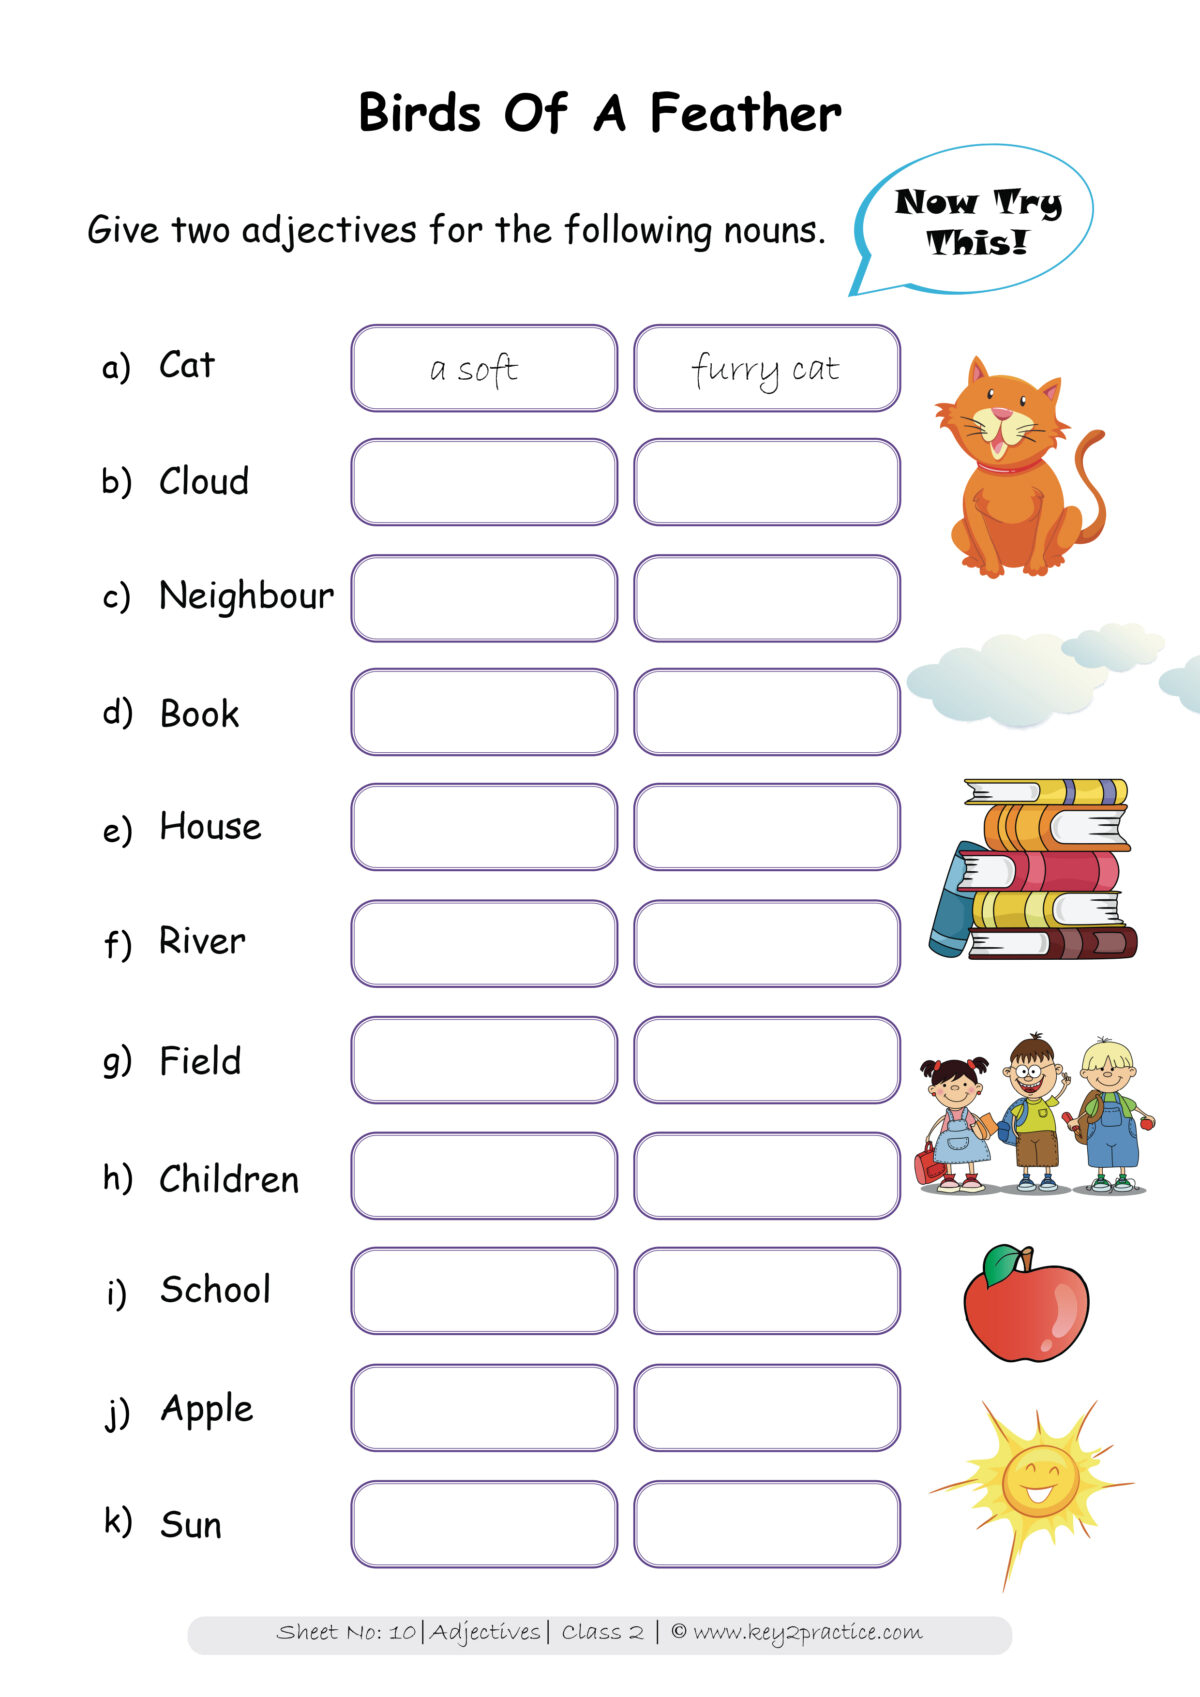 Adjectives Synonyms And Antonyms Worksheet Free Printable Adjectives